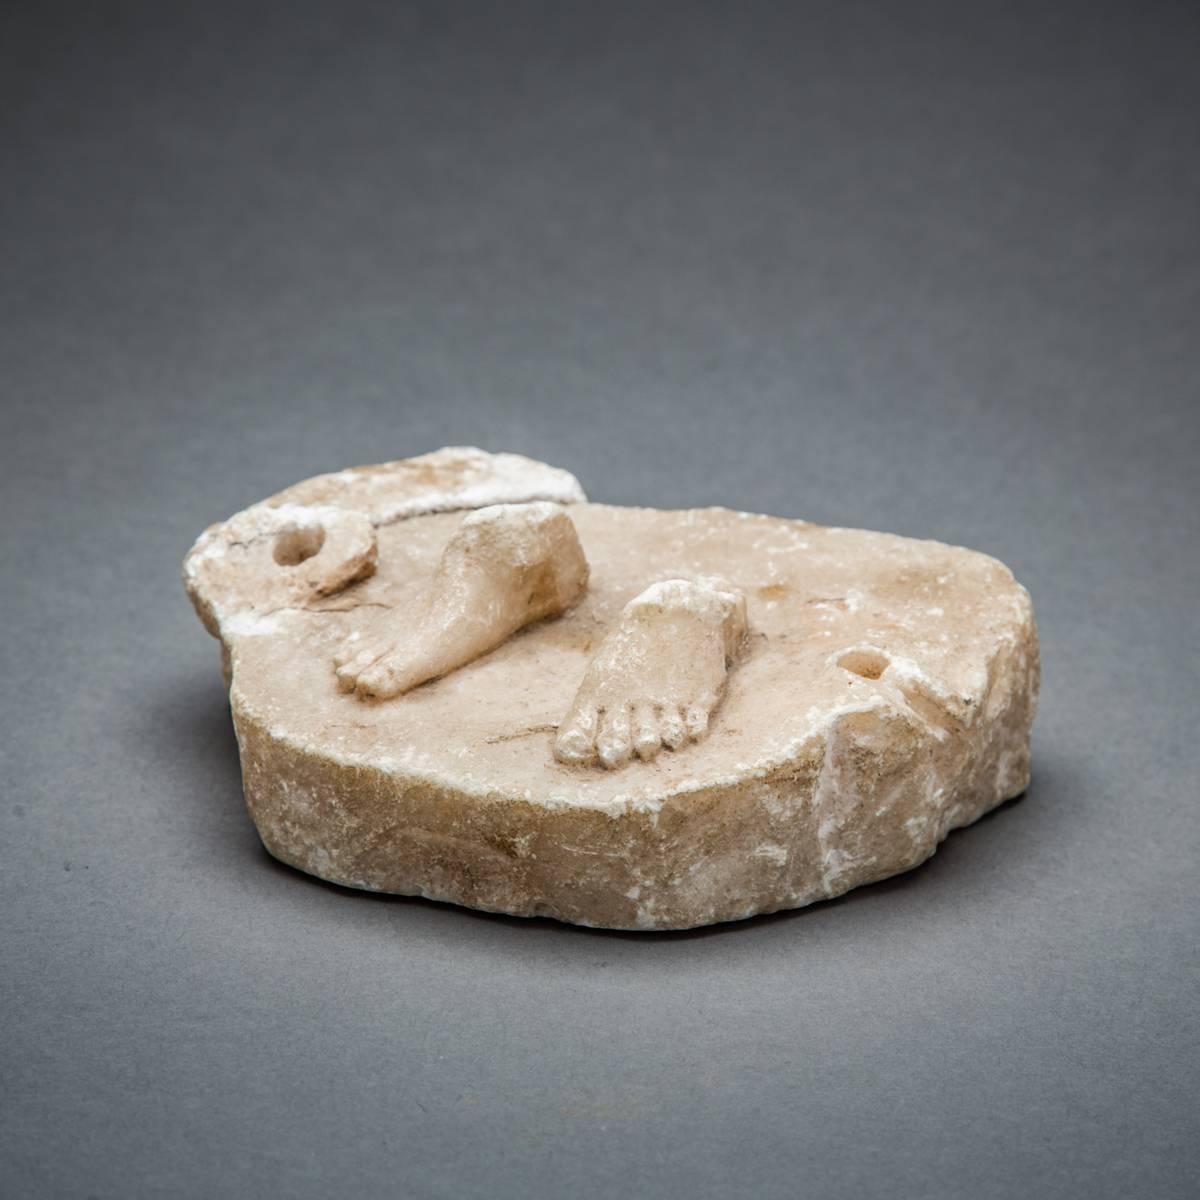 This is a truly delightful and somewhat quirky object of the remains of a small male marble sculpture. Although only his extremities survive, the piece is still aesthetically pleasing and entertaining. The feet appear natural, even the toenails have